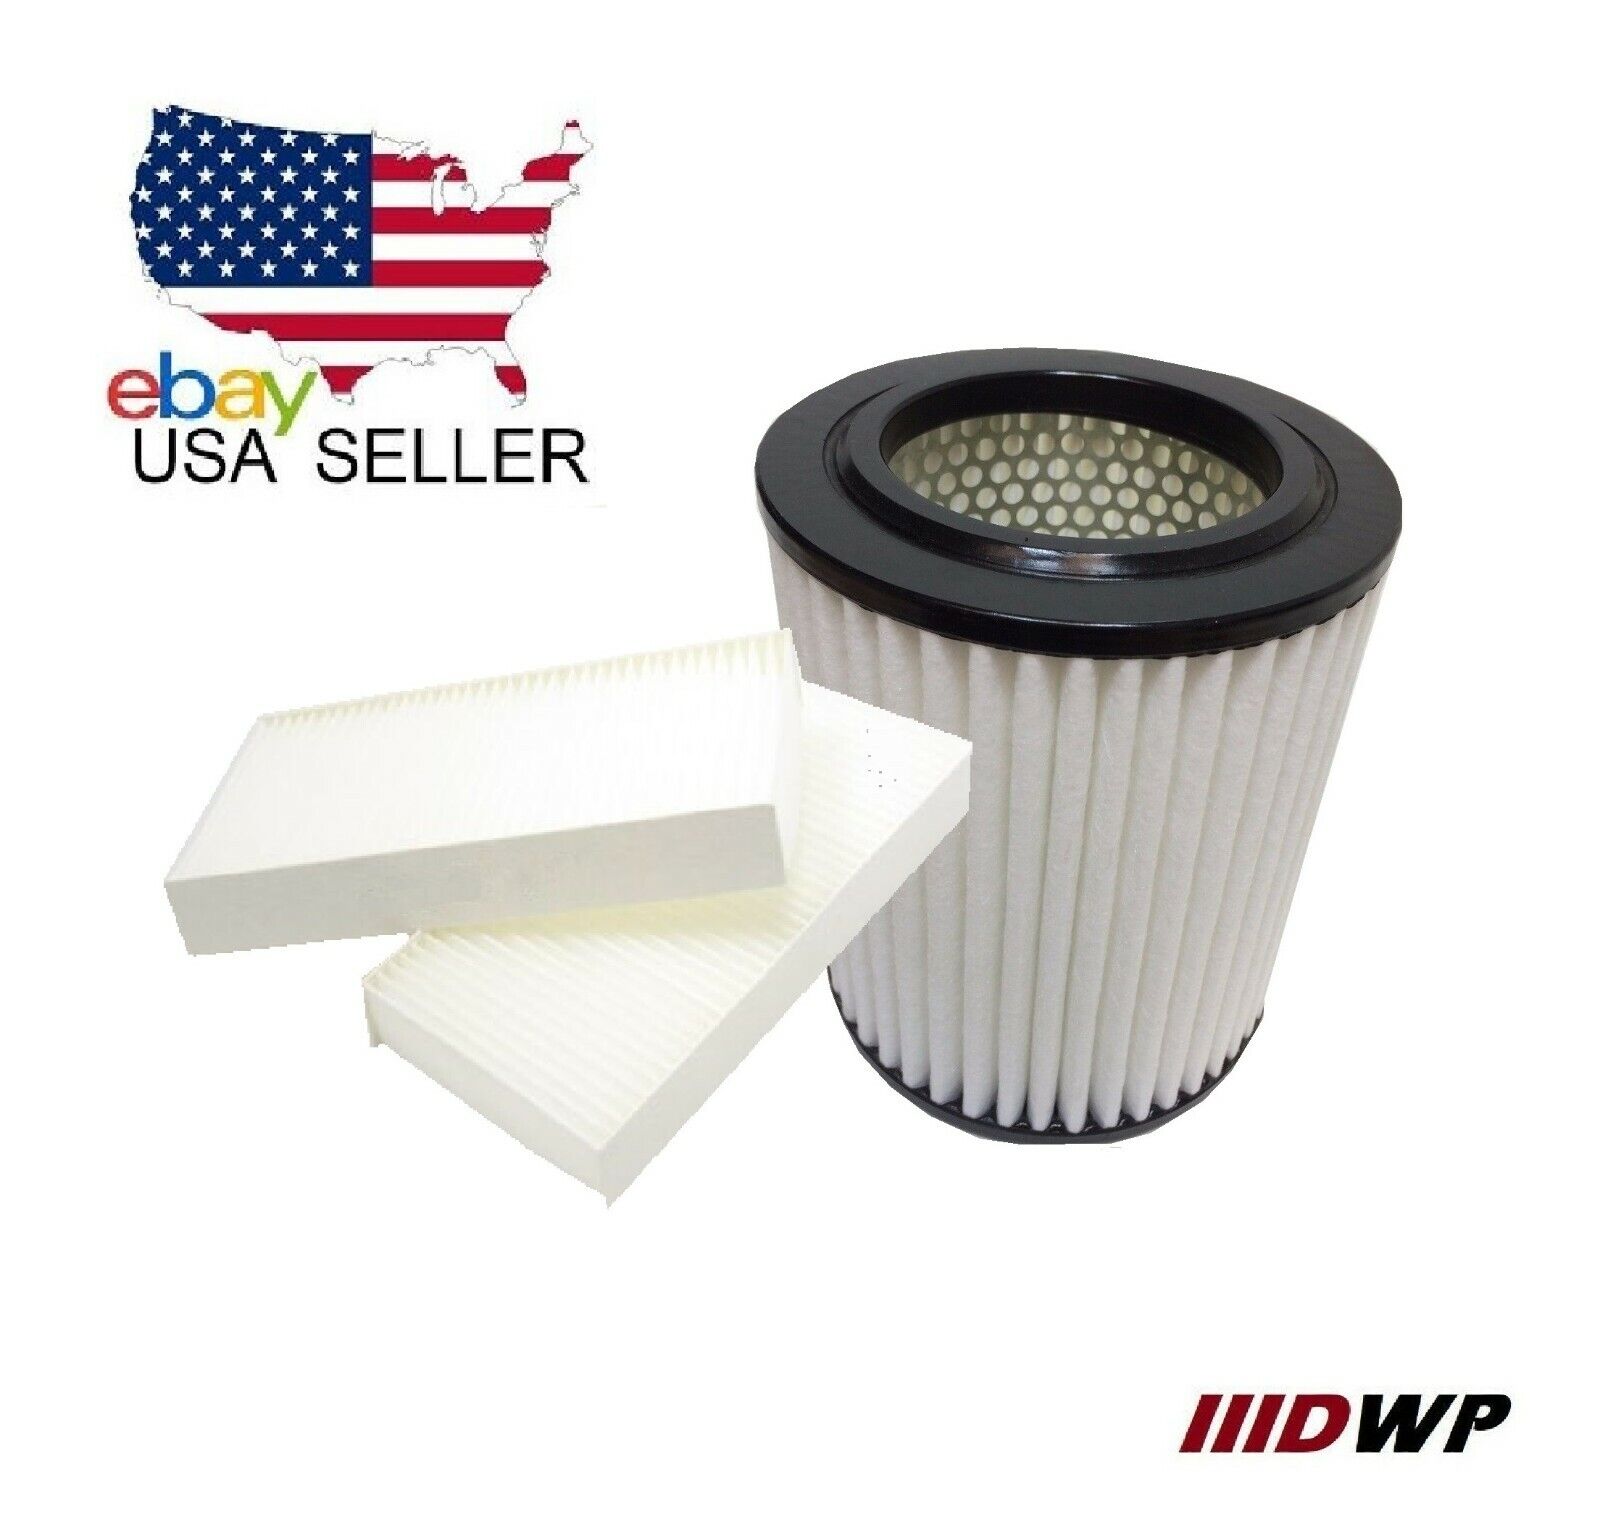 ENGINE AIR FILTER + CABIN AIR FILTER FOR HONDA ELEMENT CIVIC 2.0L CR-V ACURA RSX